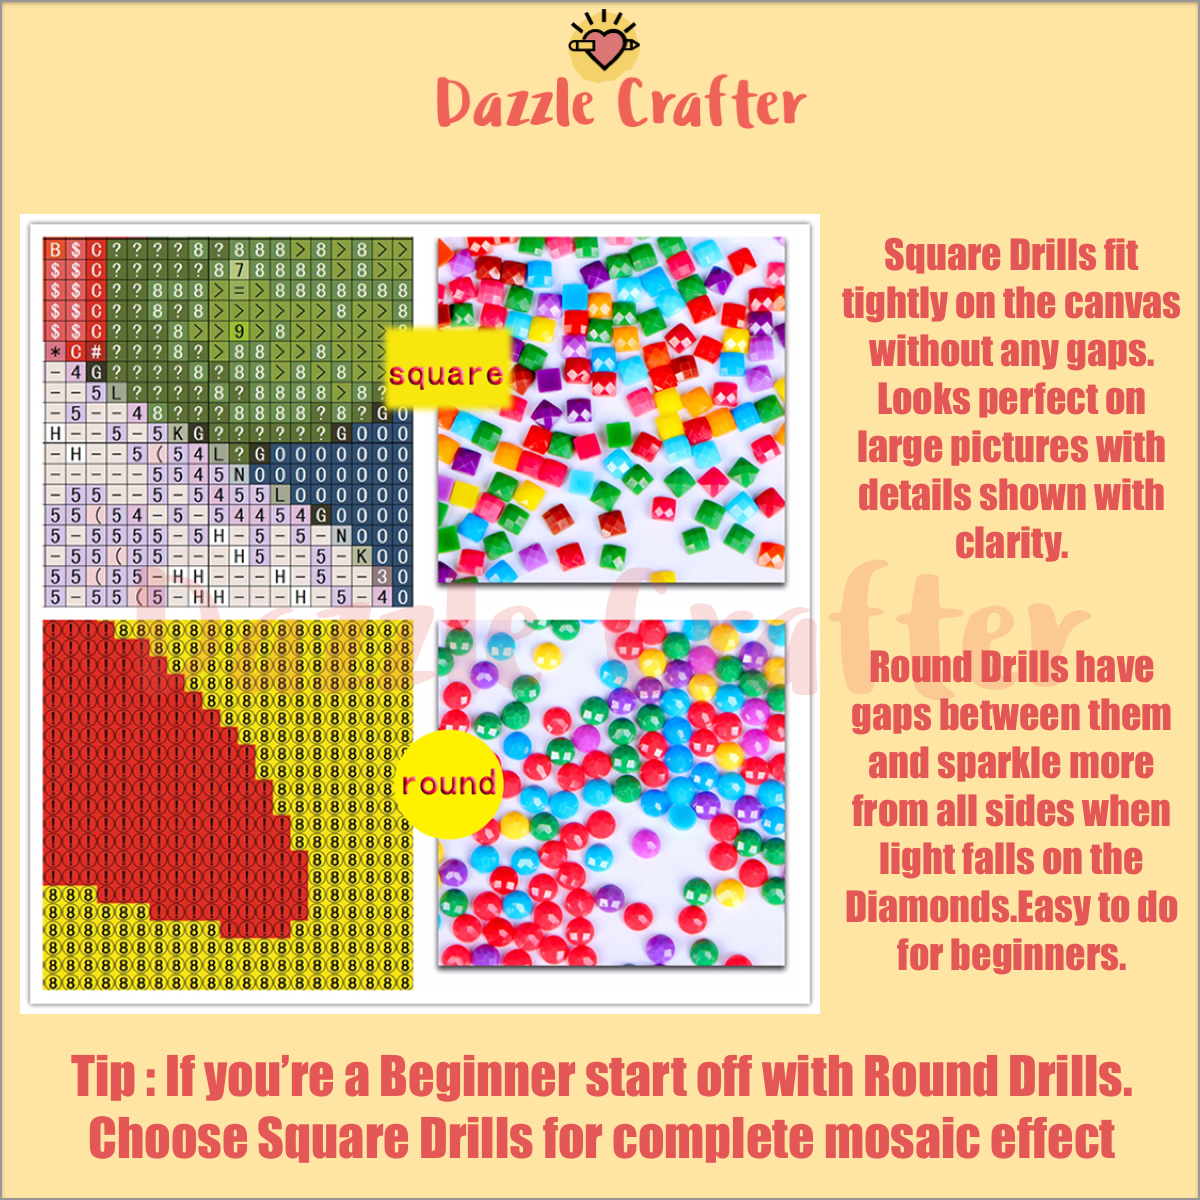 Dancing Dolphins Diamond Painting Kit-BEGINNER'S KITS - DAZZLE CRAFTER